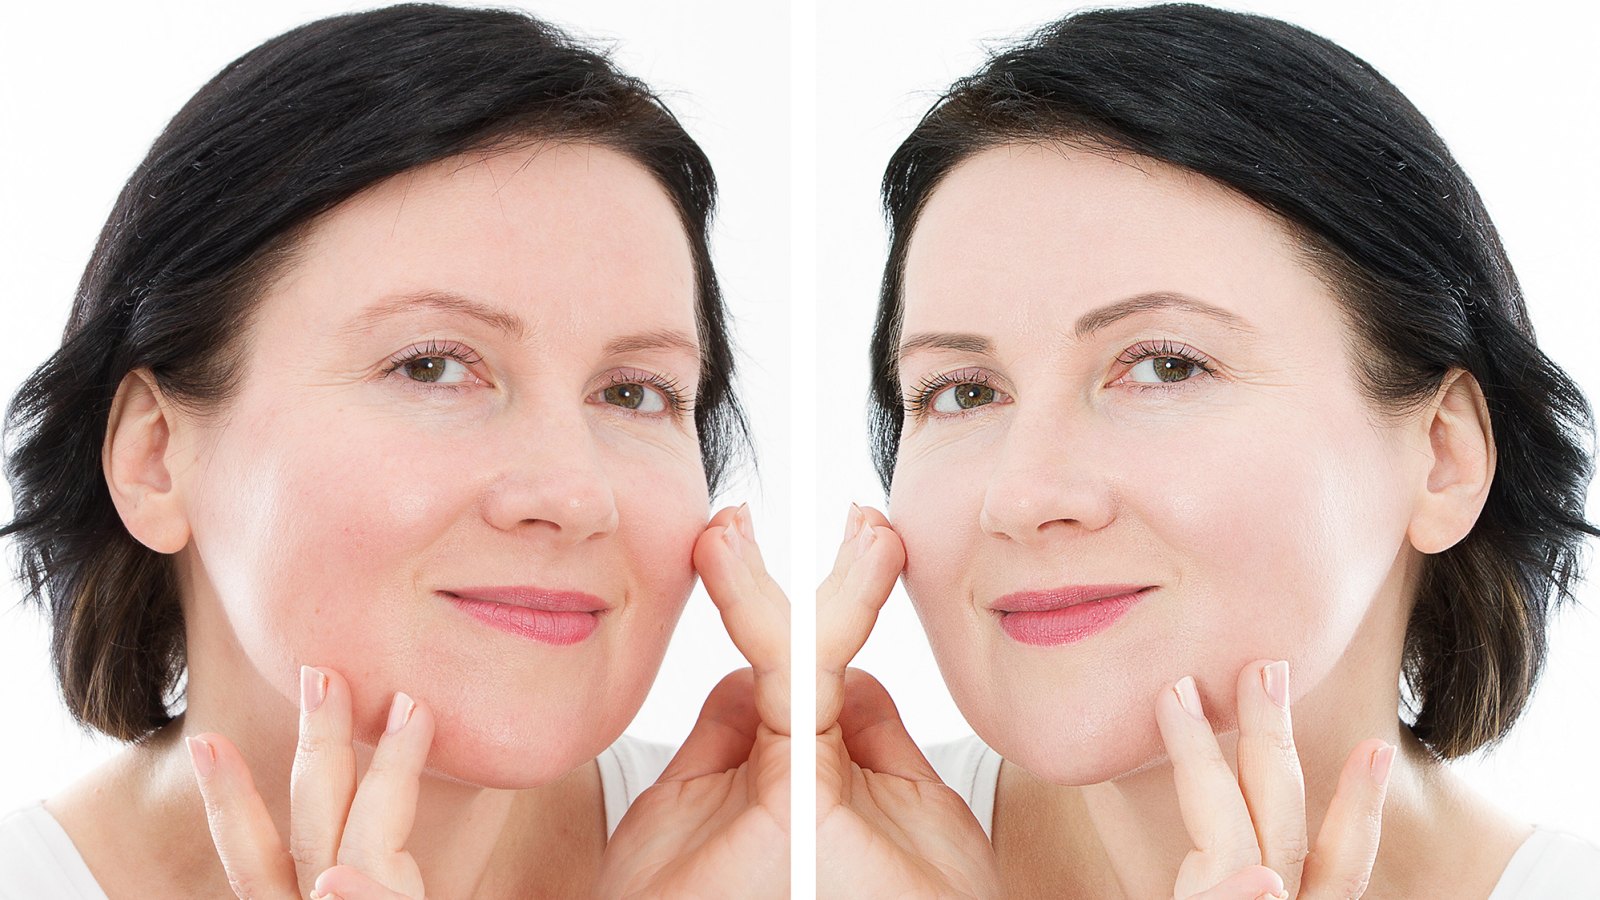 Middle age close up woman happy face before after cosmetic procedures. Skin care for wrinkled face. Before-after anti-aging facelift treatment. Facial skincare and contouring. Beauty and make-up